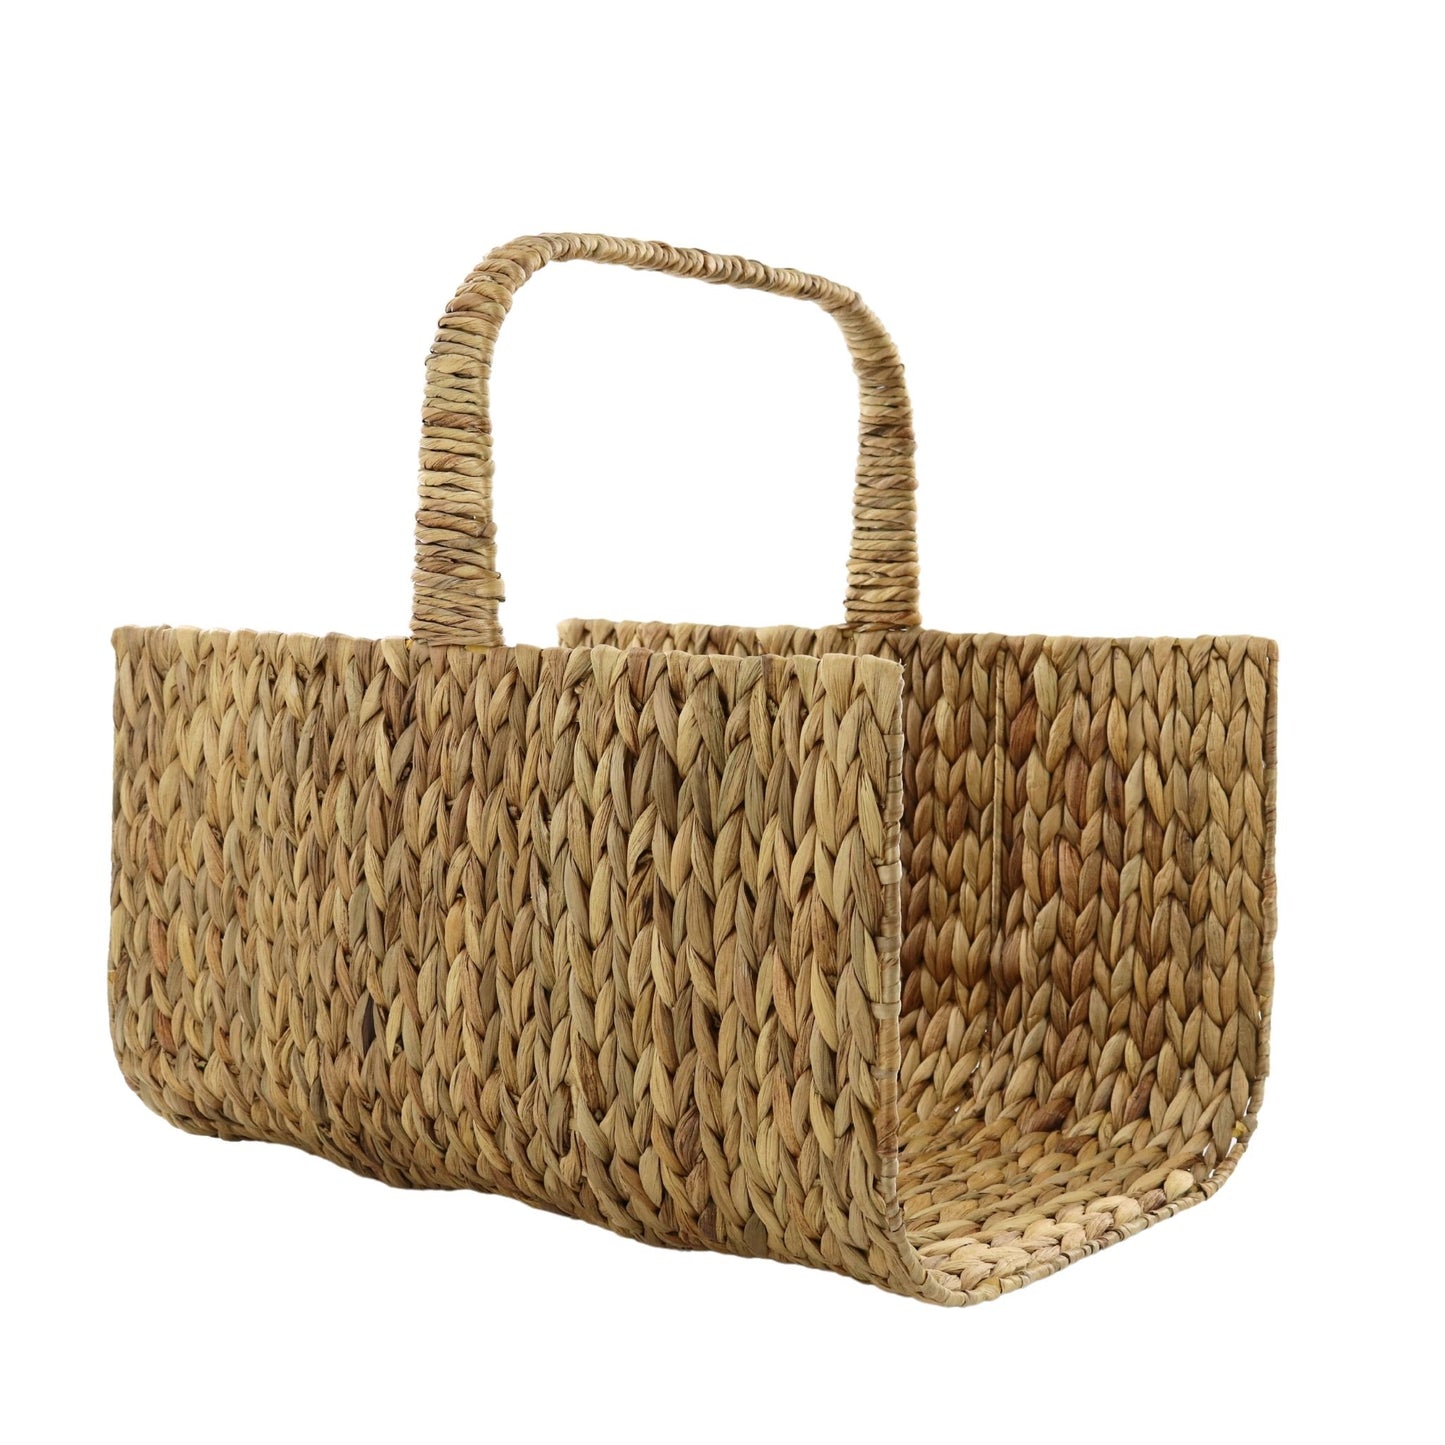 Hand Crafted Carrier Basket